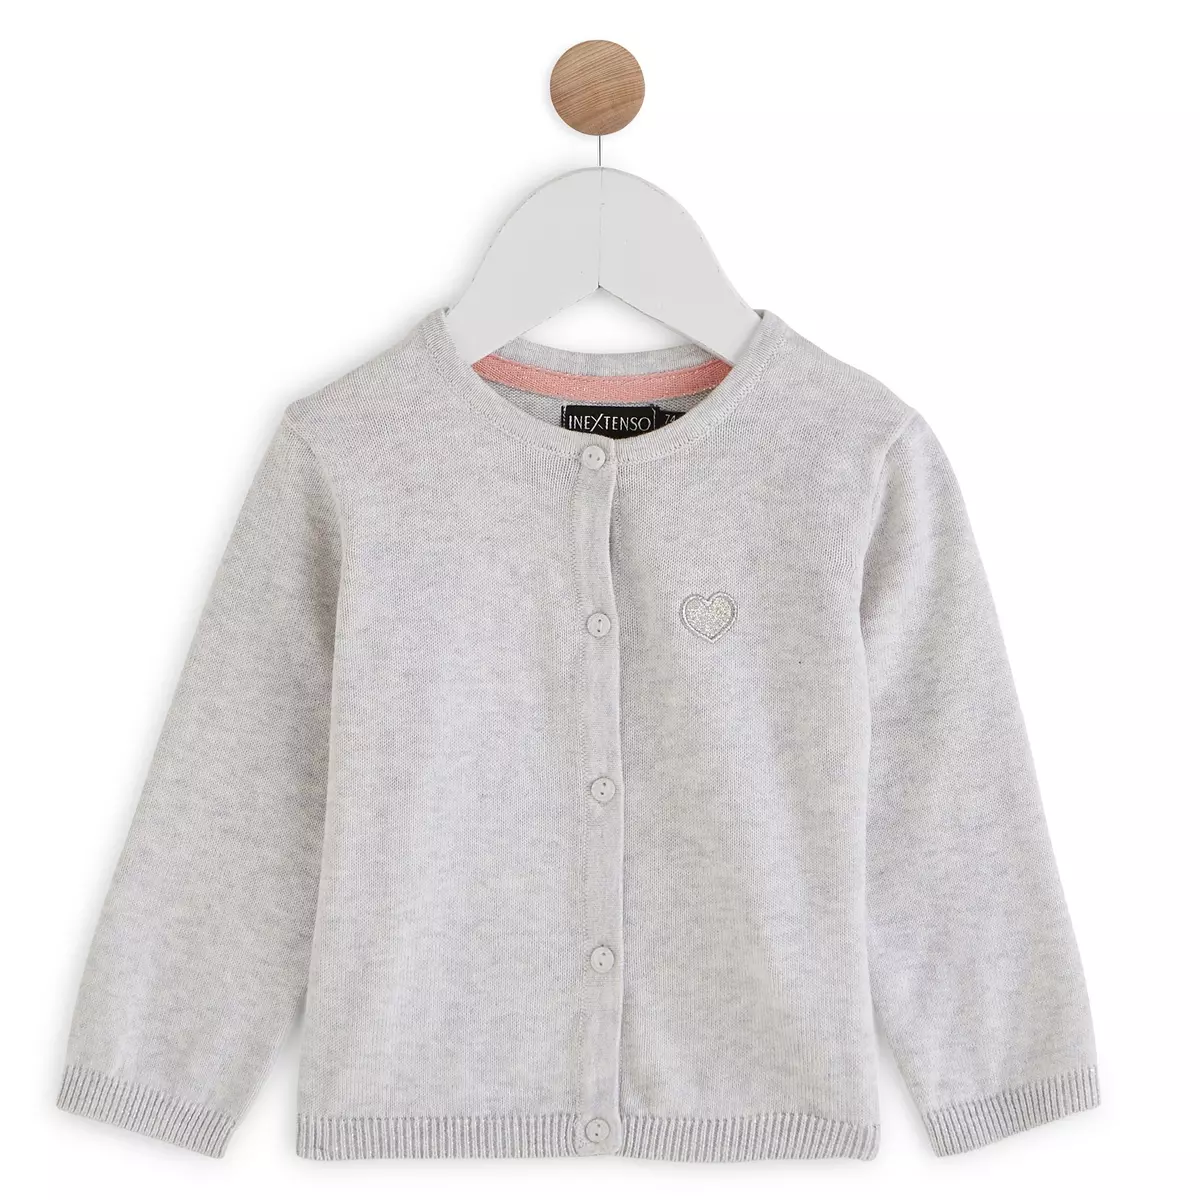 IN EXTENSO Cardigan tricot bébé fille